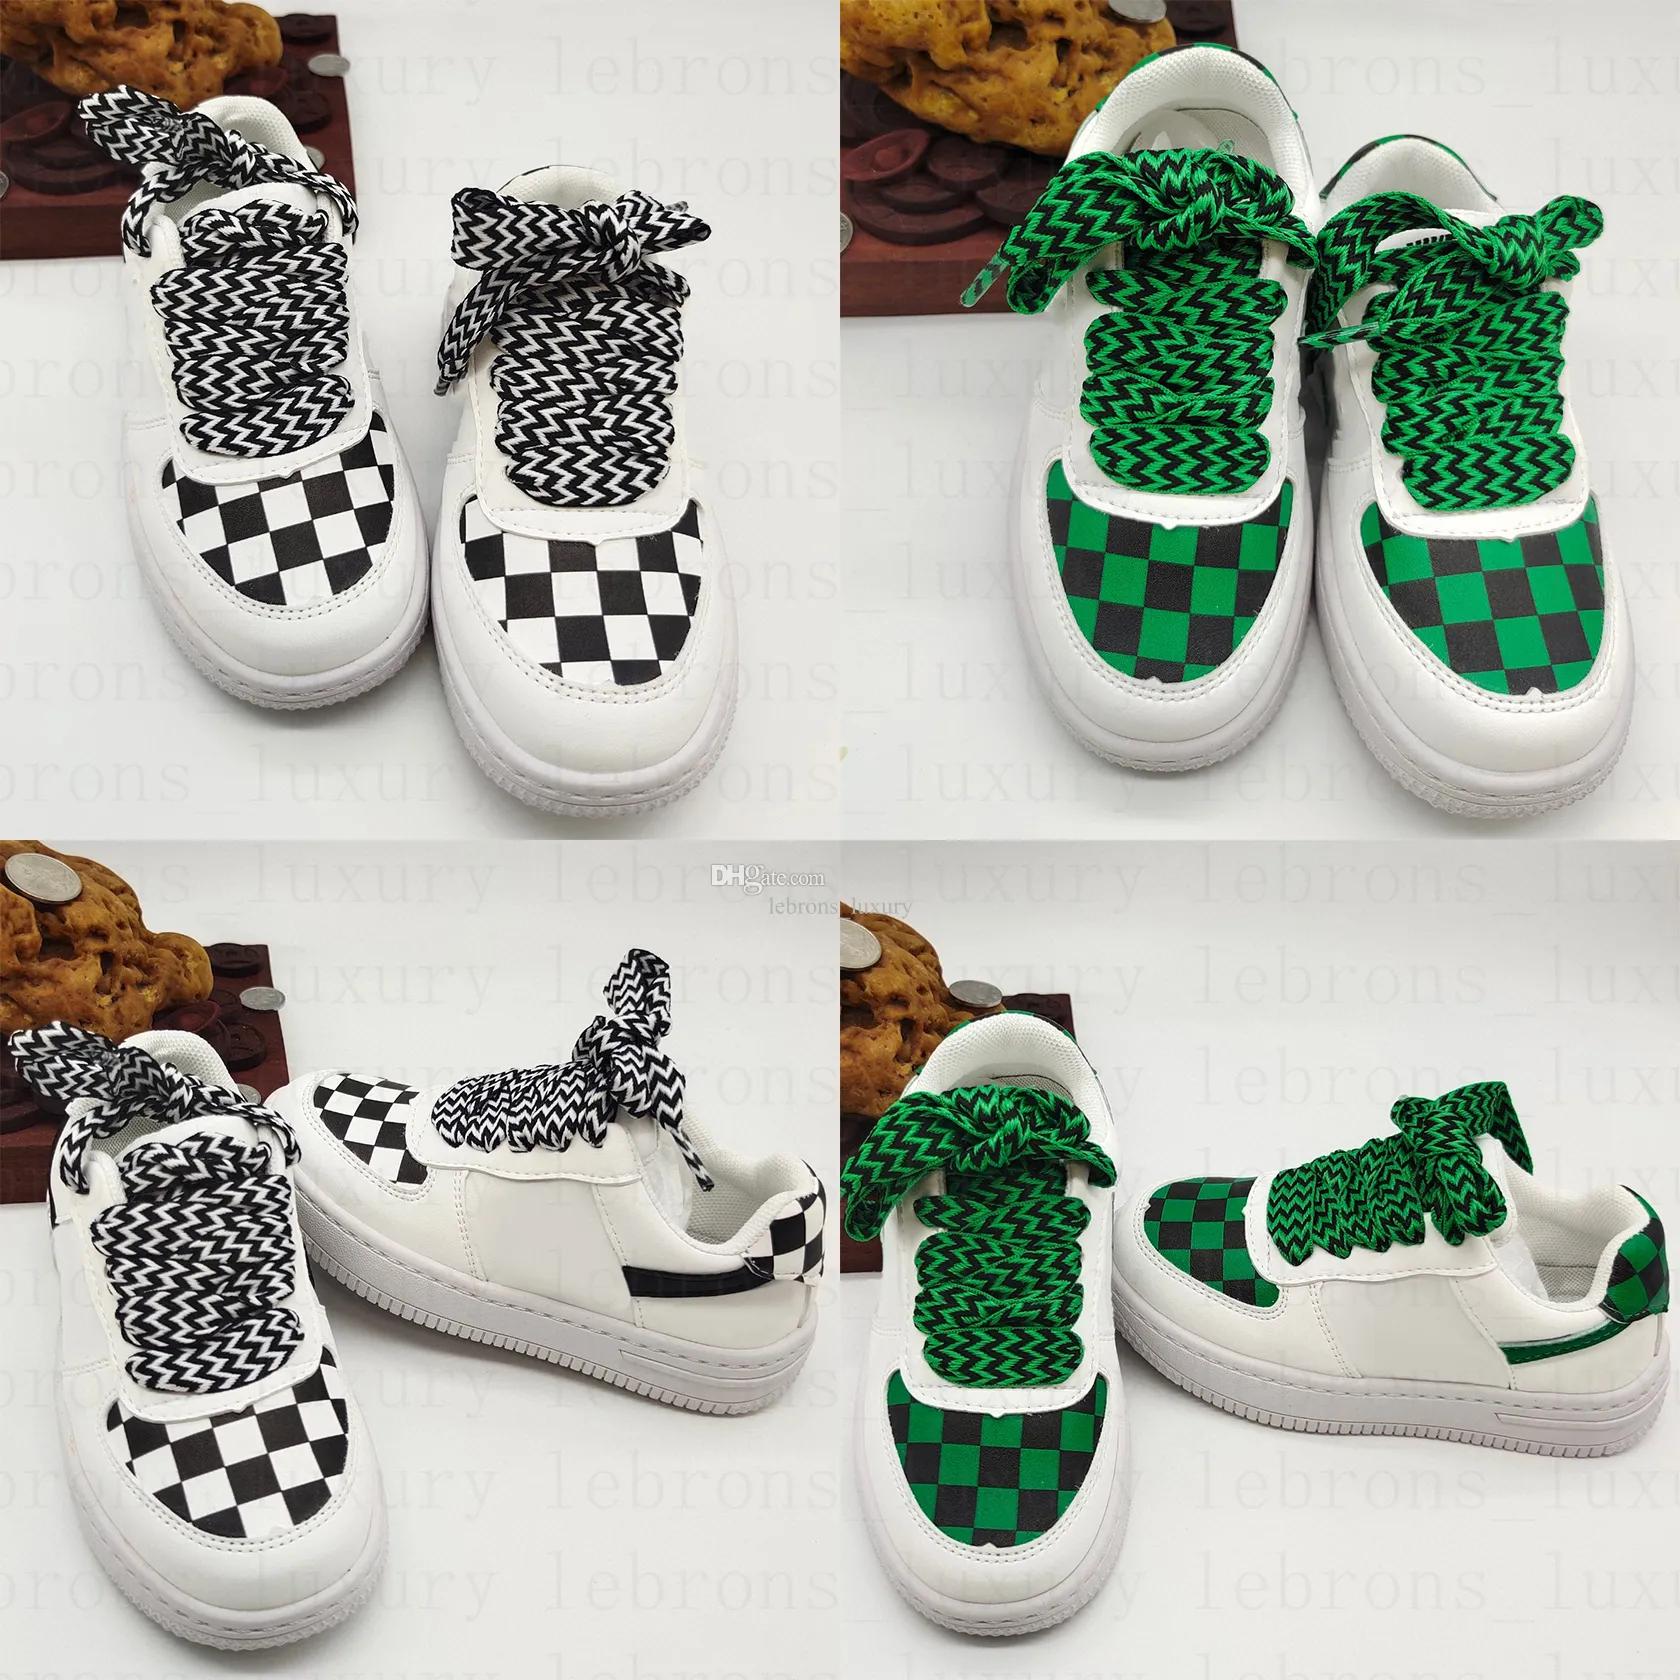 Kids Shoes Checkerboard Wave Children's Sneakers Fashion Casual Sports Size 26-35 J8jn#